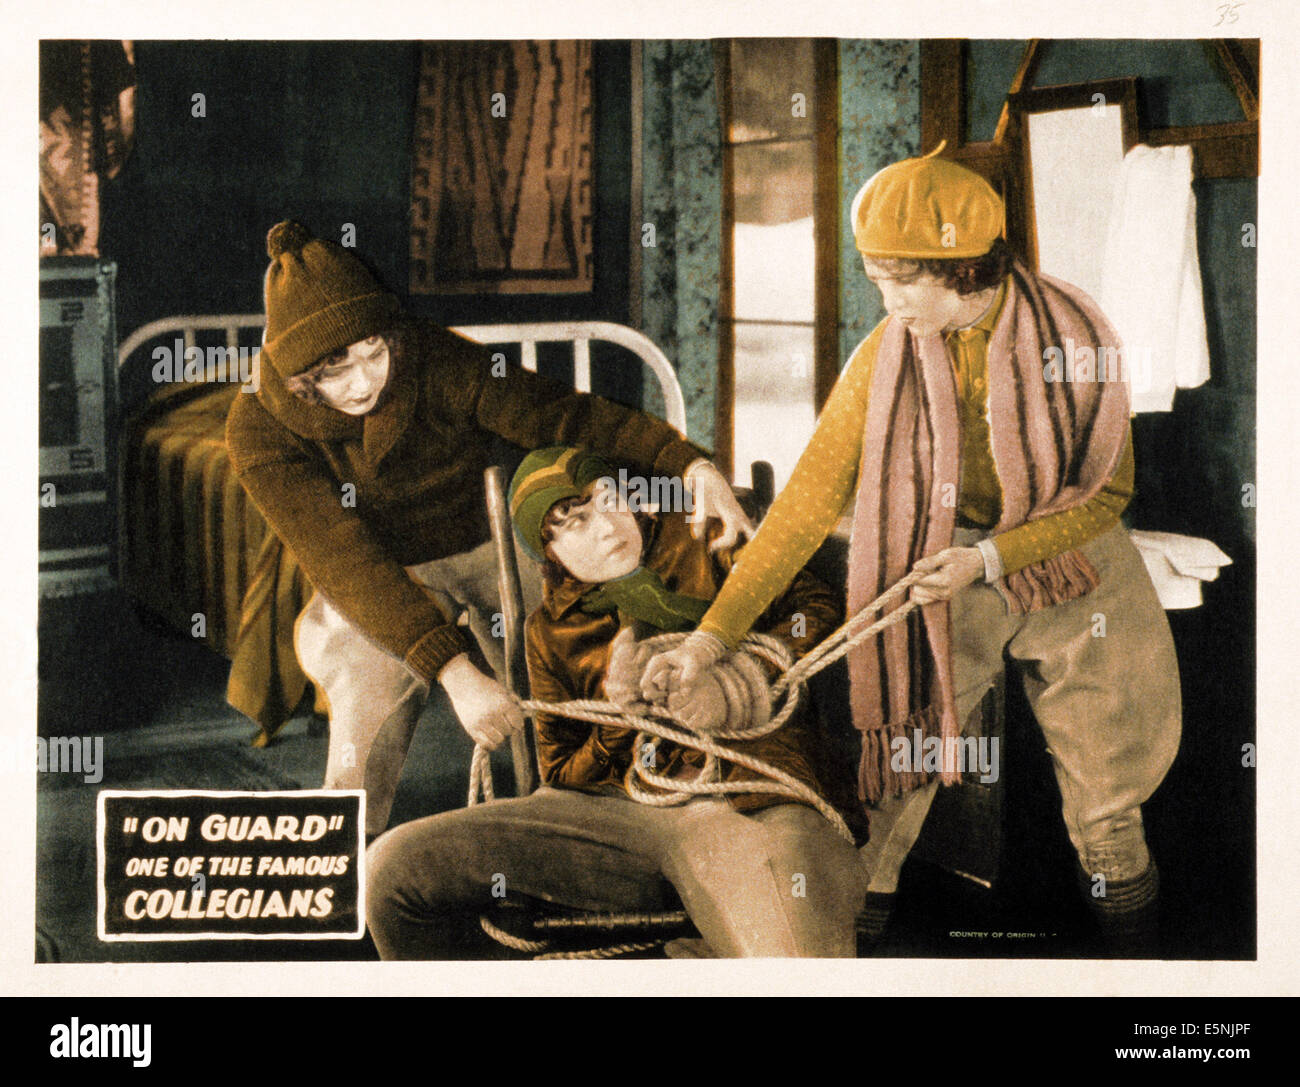 ON GUARD, US lobbycard, Series #4, Episode #3 of 'The Collegians,' 1929 Stock Photo